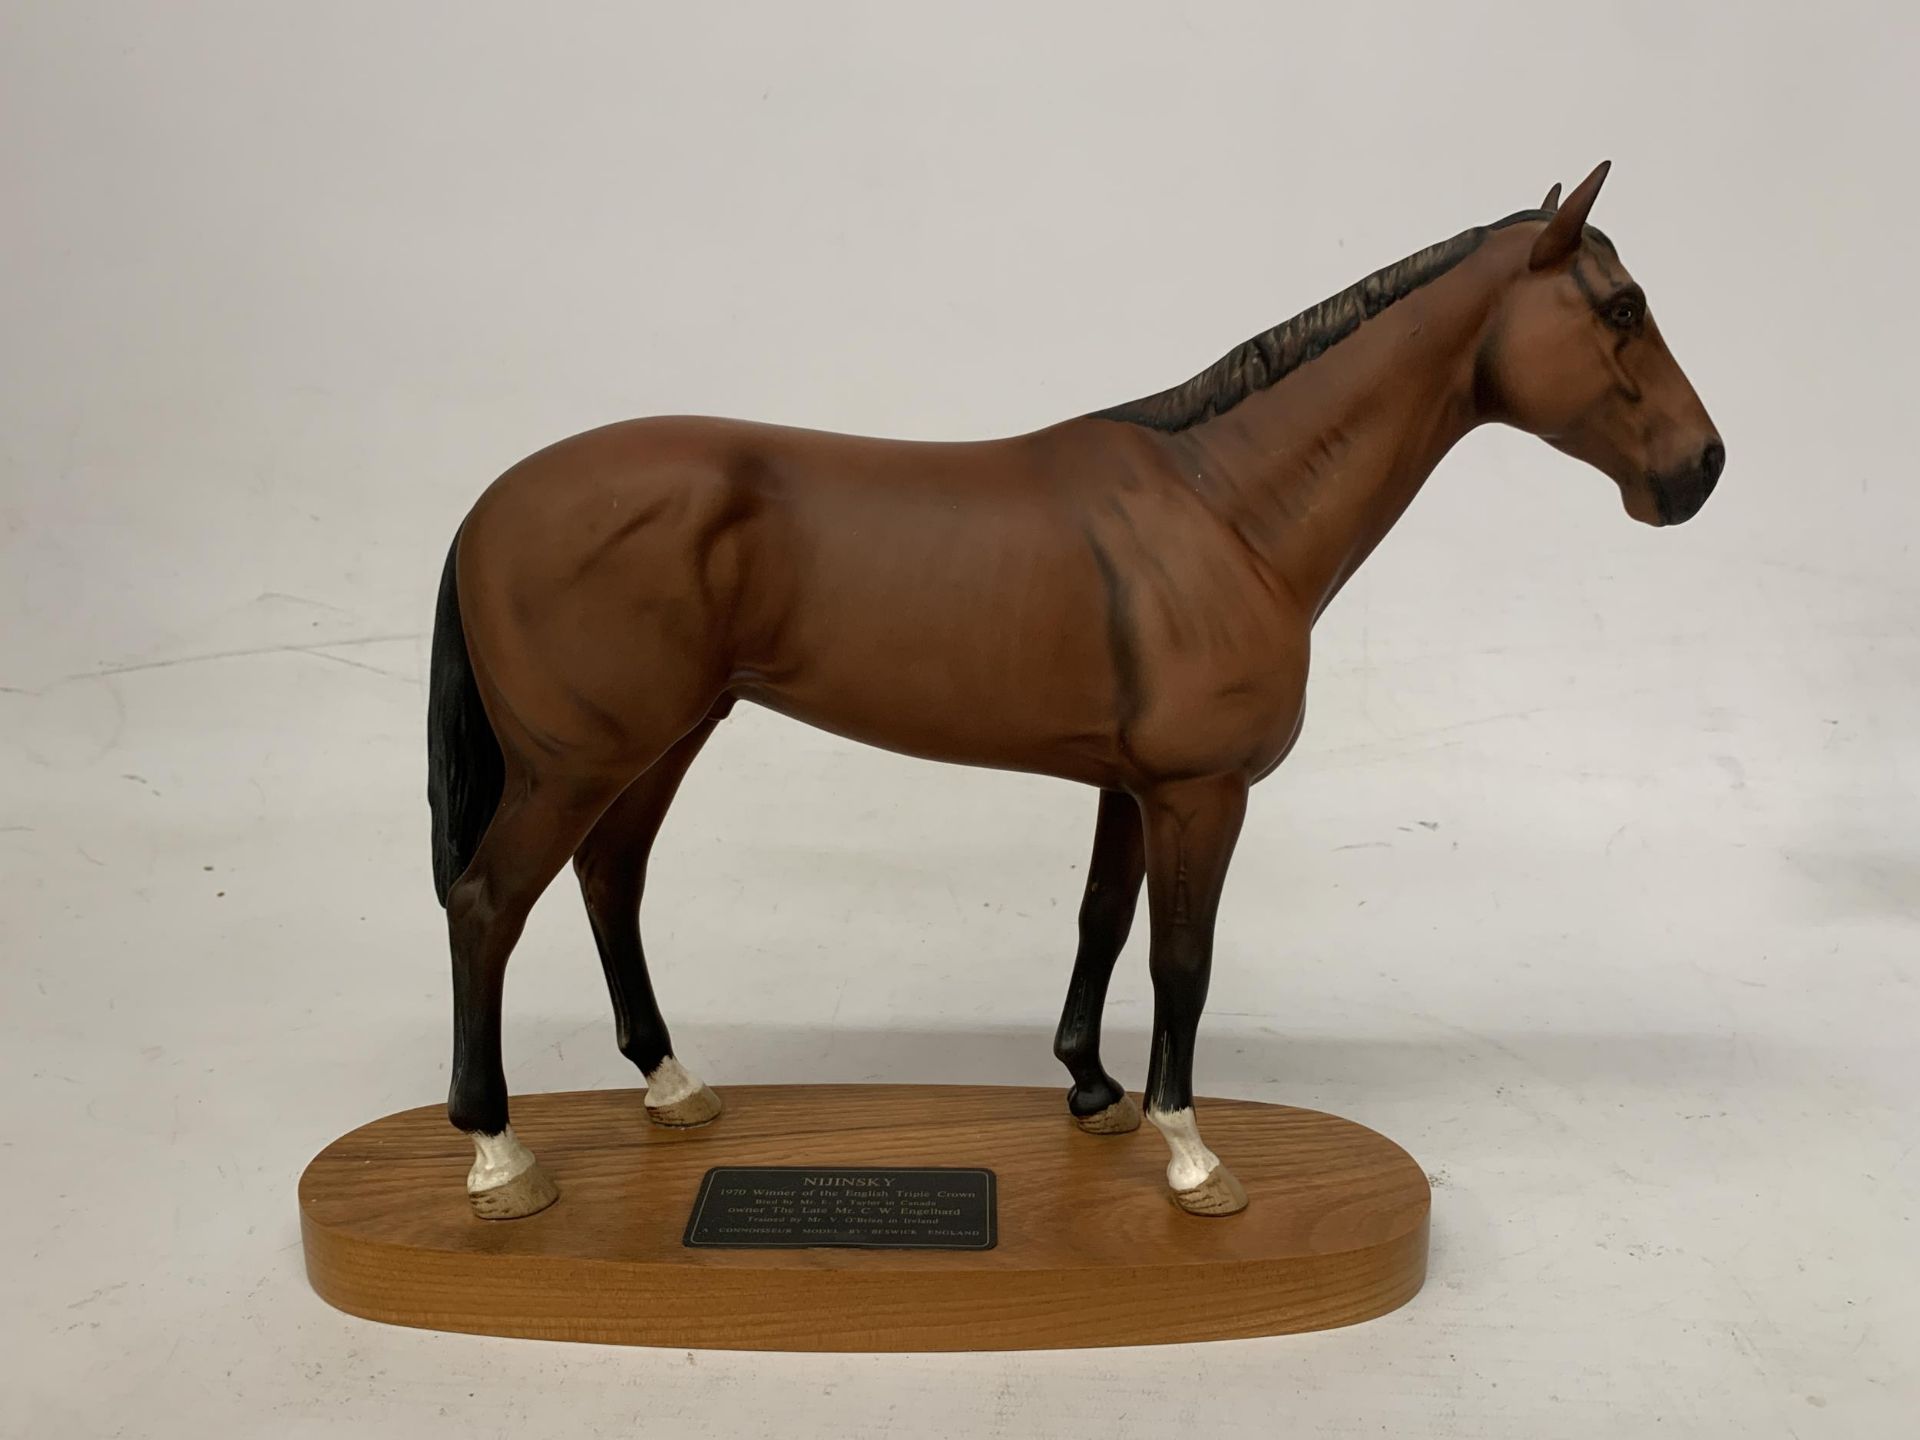 A BESWICK "NIJINSKY" HORSE FIGURINE FROM THE CONNOISSEUR HORSES SERIES WINNER OF THE TRIPLE CROWN